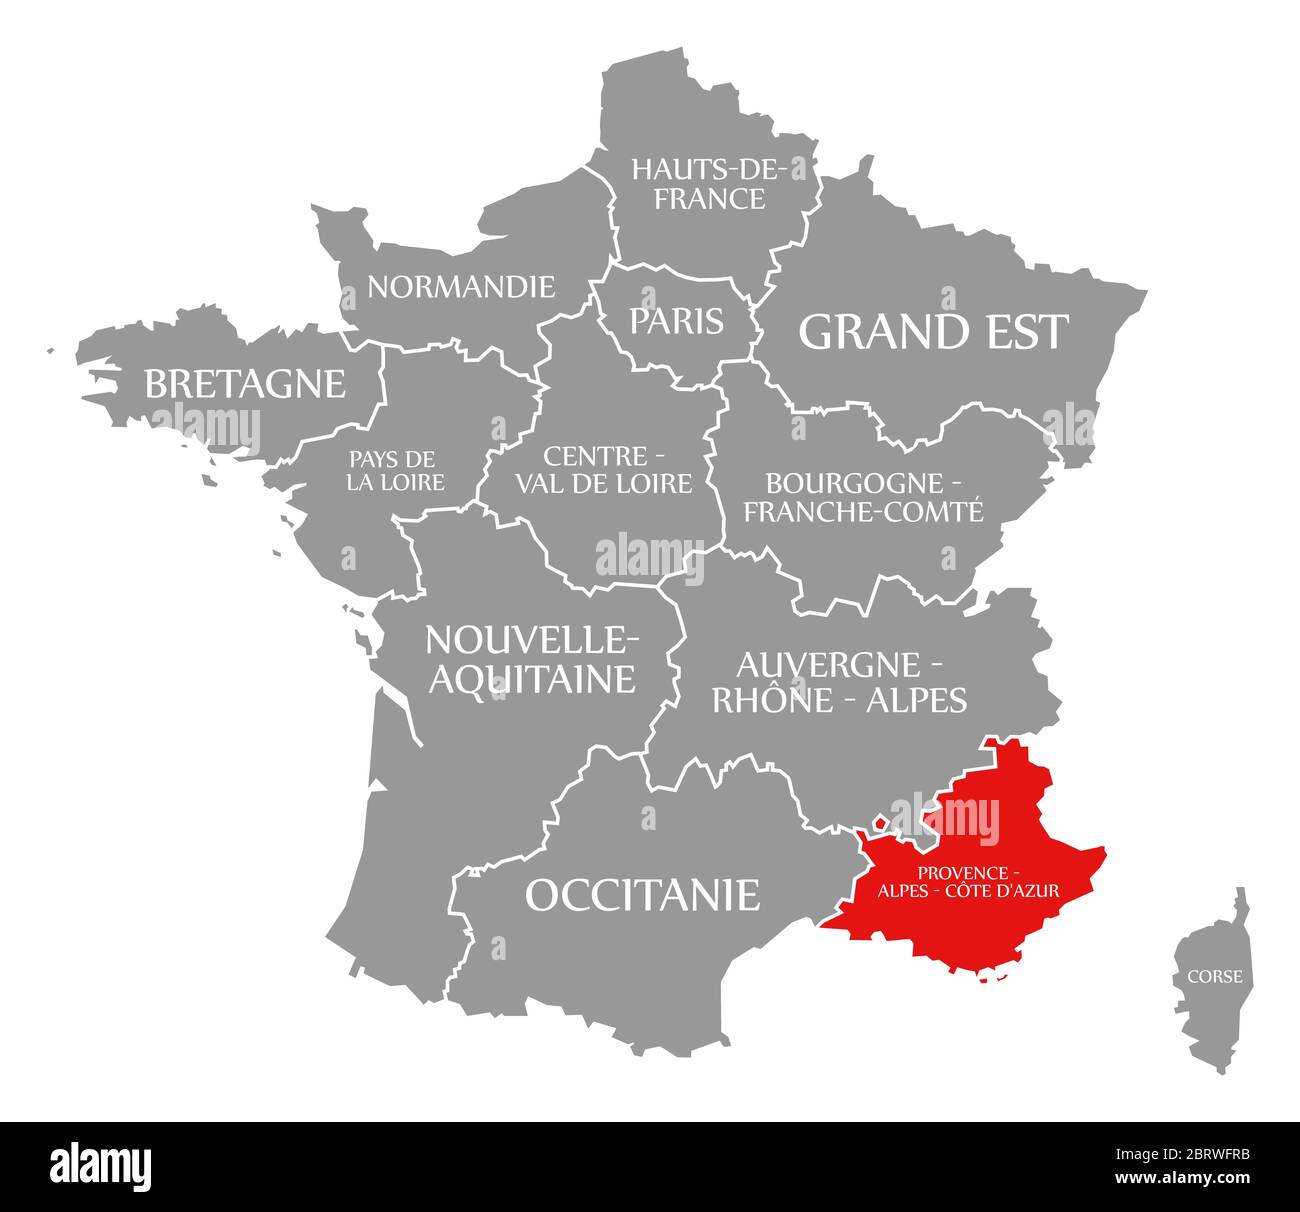 Provence - Alpes - Cote d'Azur red highlighted in map of France Stock Photo